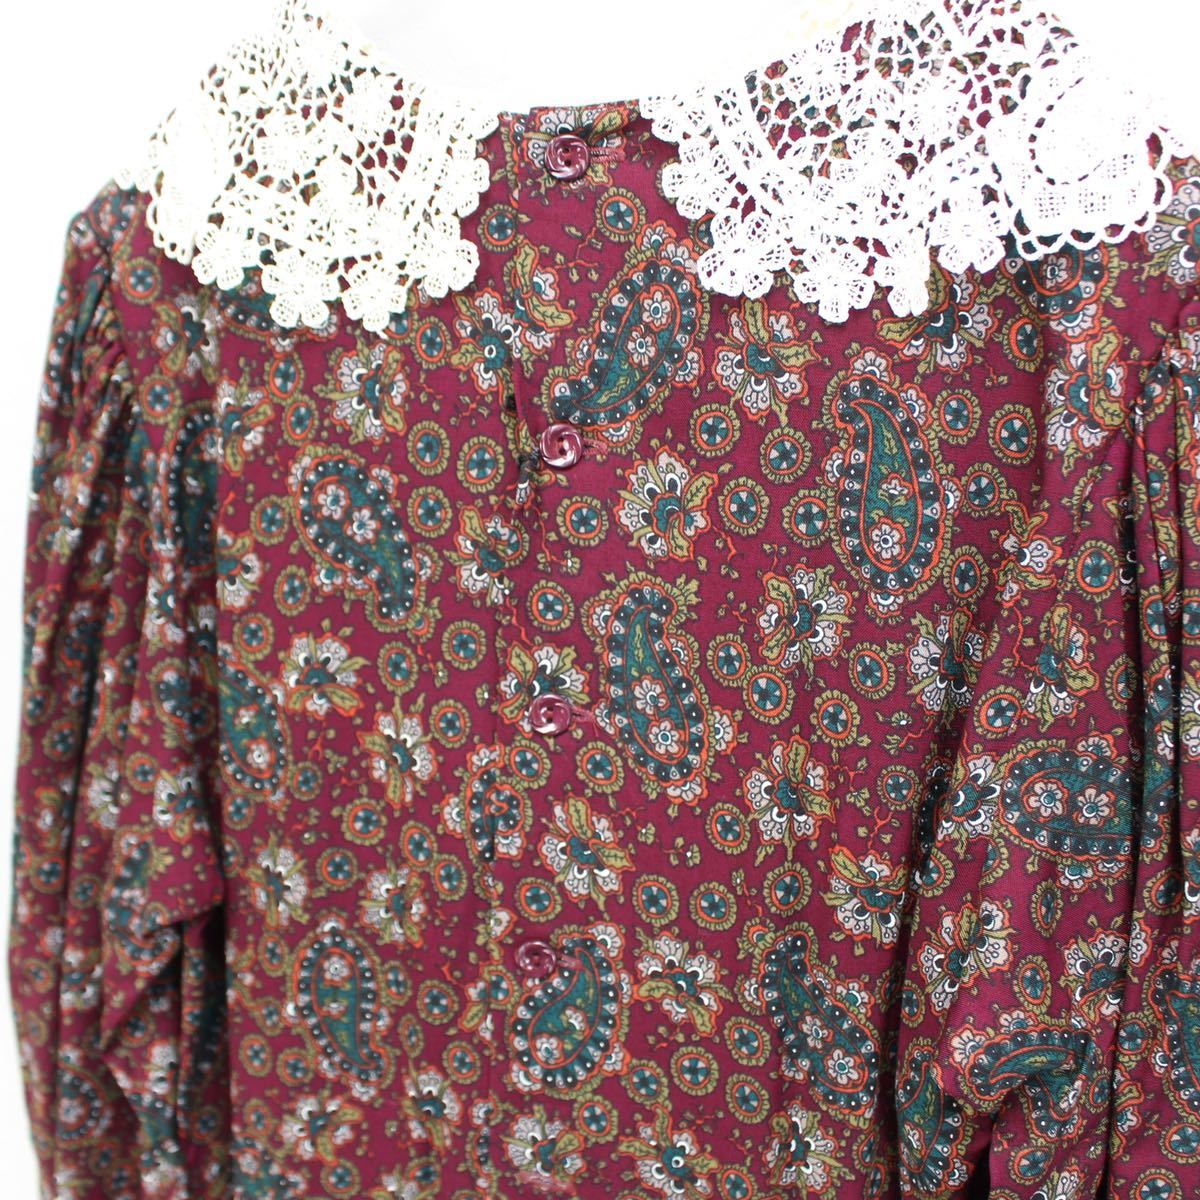 USA VINTAGE PAISLEY PATTERNED LACE COLLAR DESIGN LONG ONE PIECE